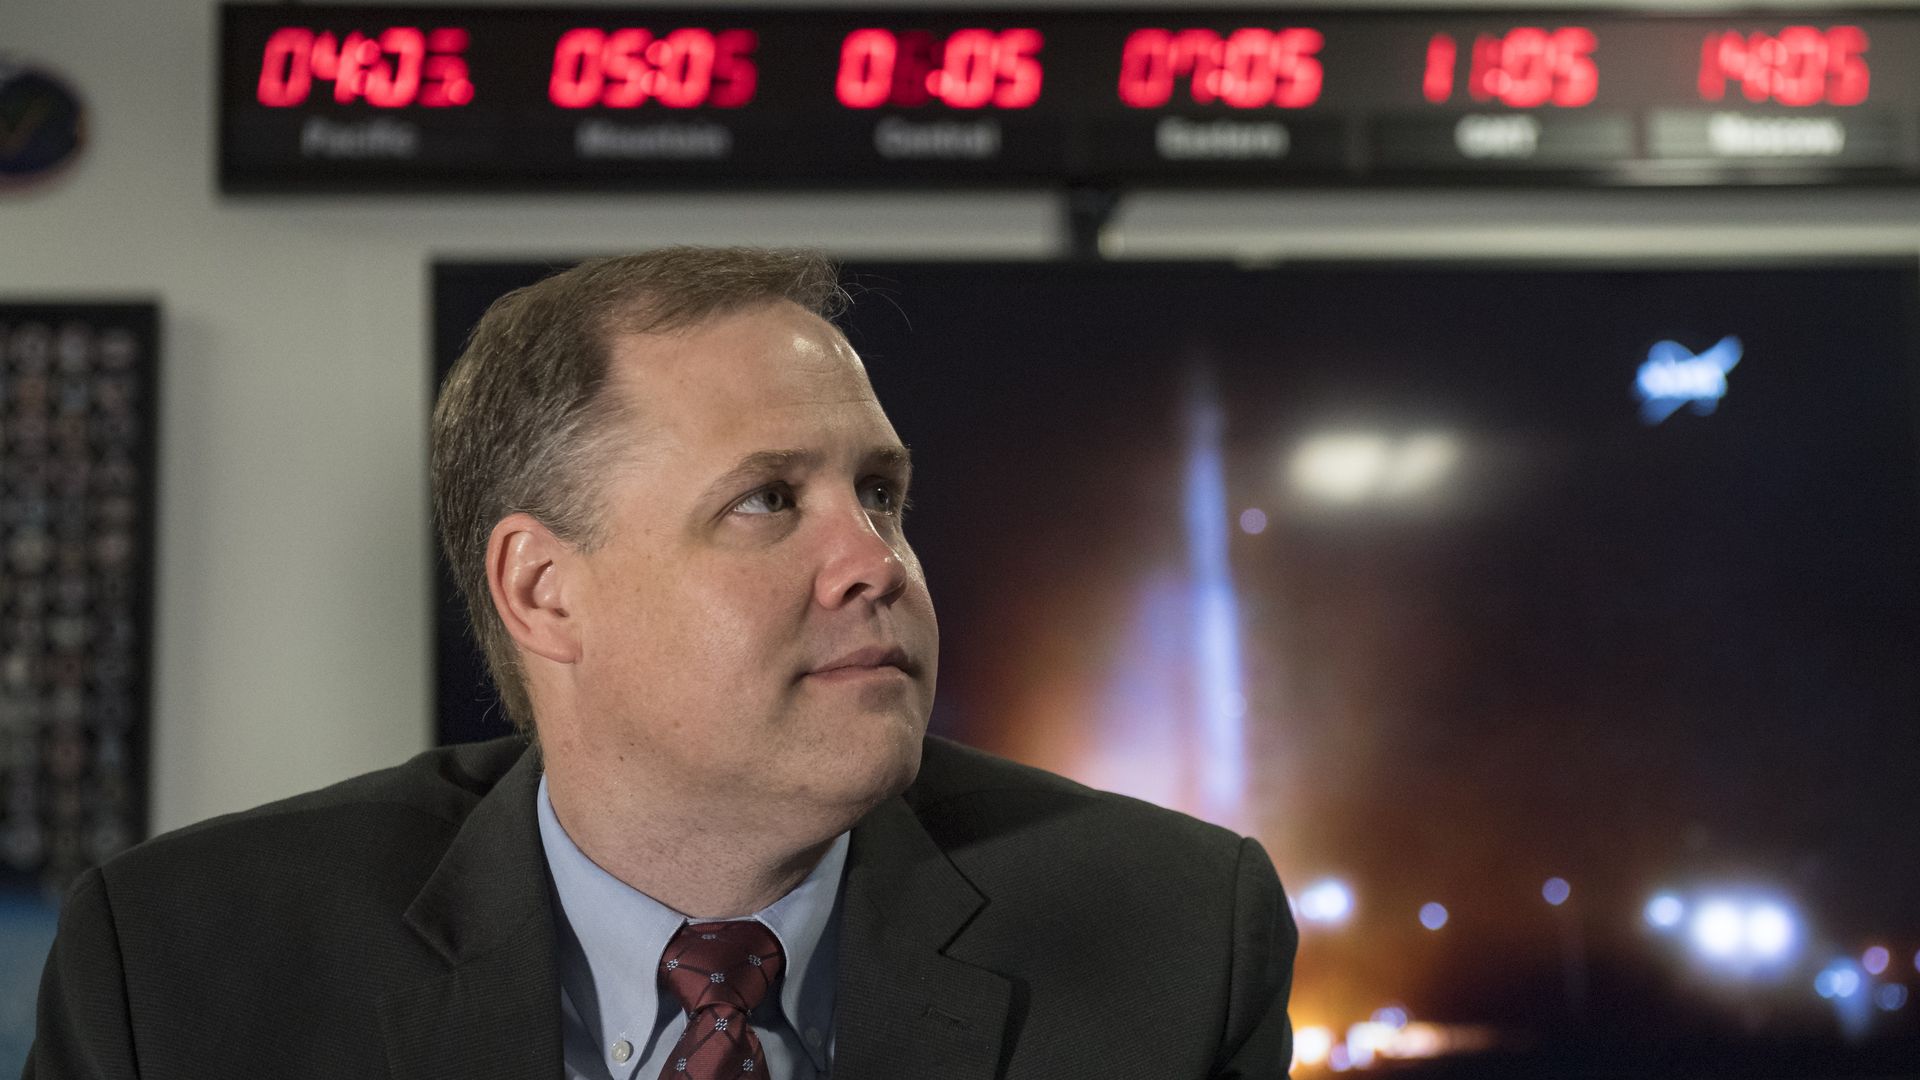 NASA administrator Jim Bridenstine seen before a rocket launch on May 5, 2018.